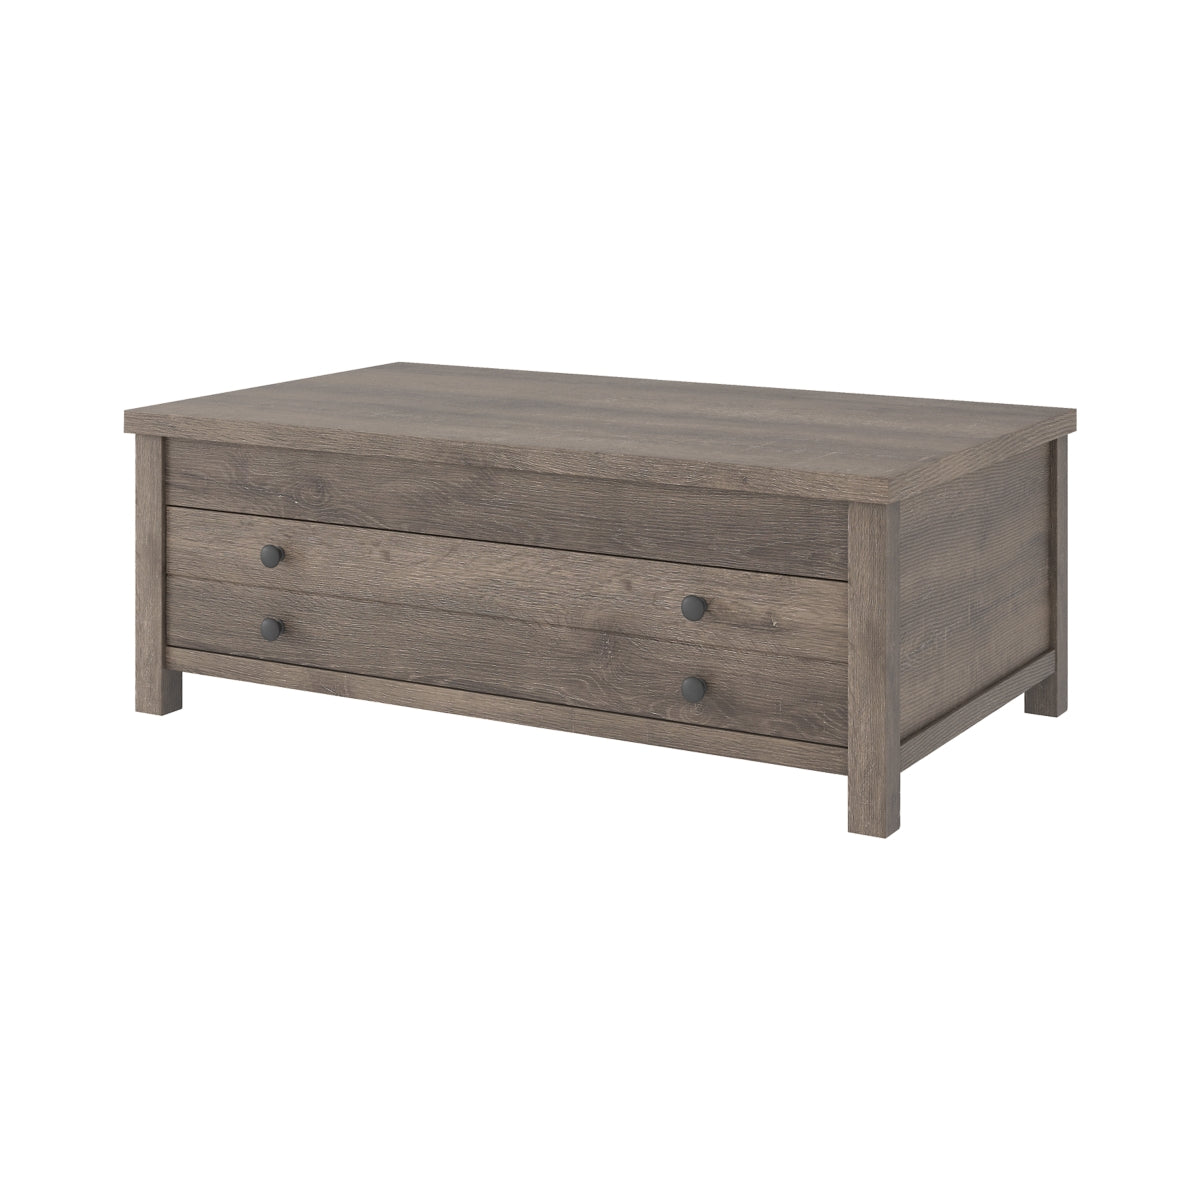 Arlenbry Coffee Table with 2 End Tables